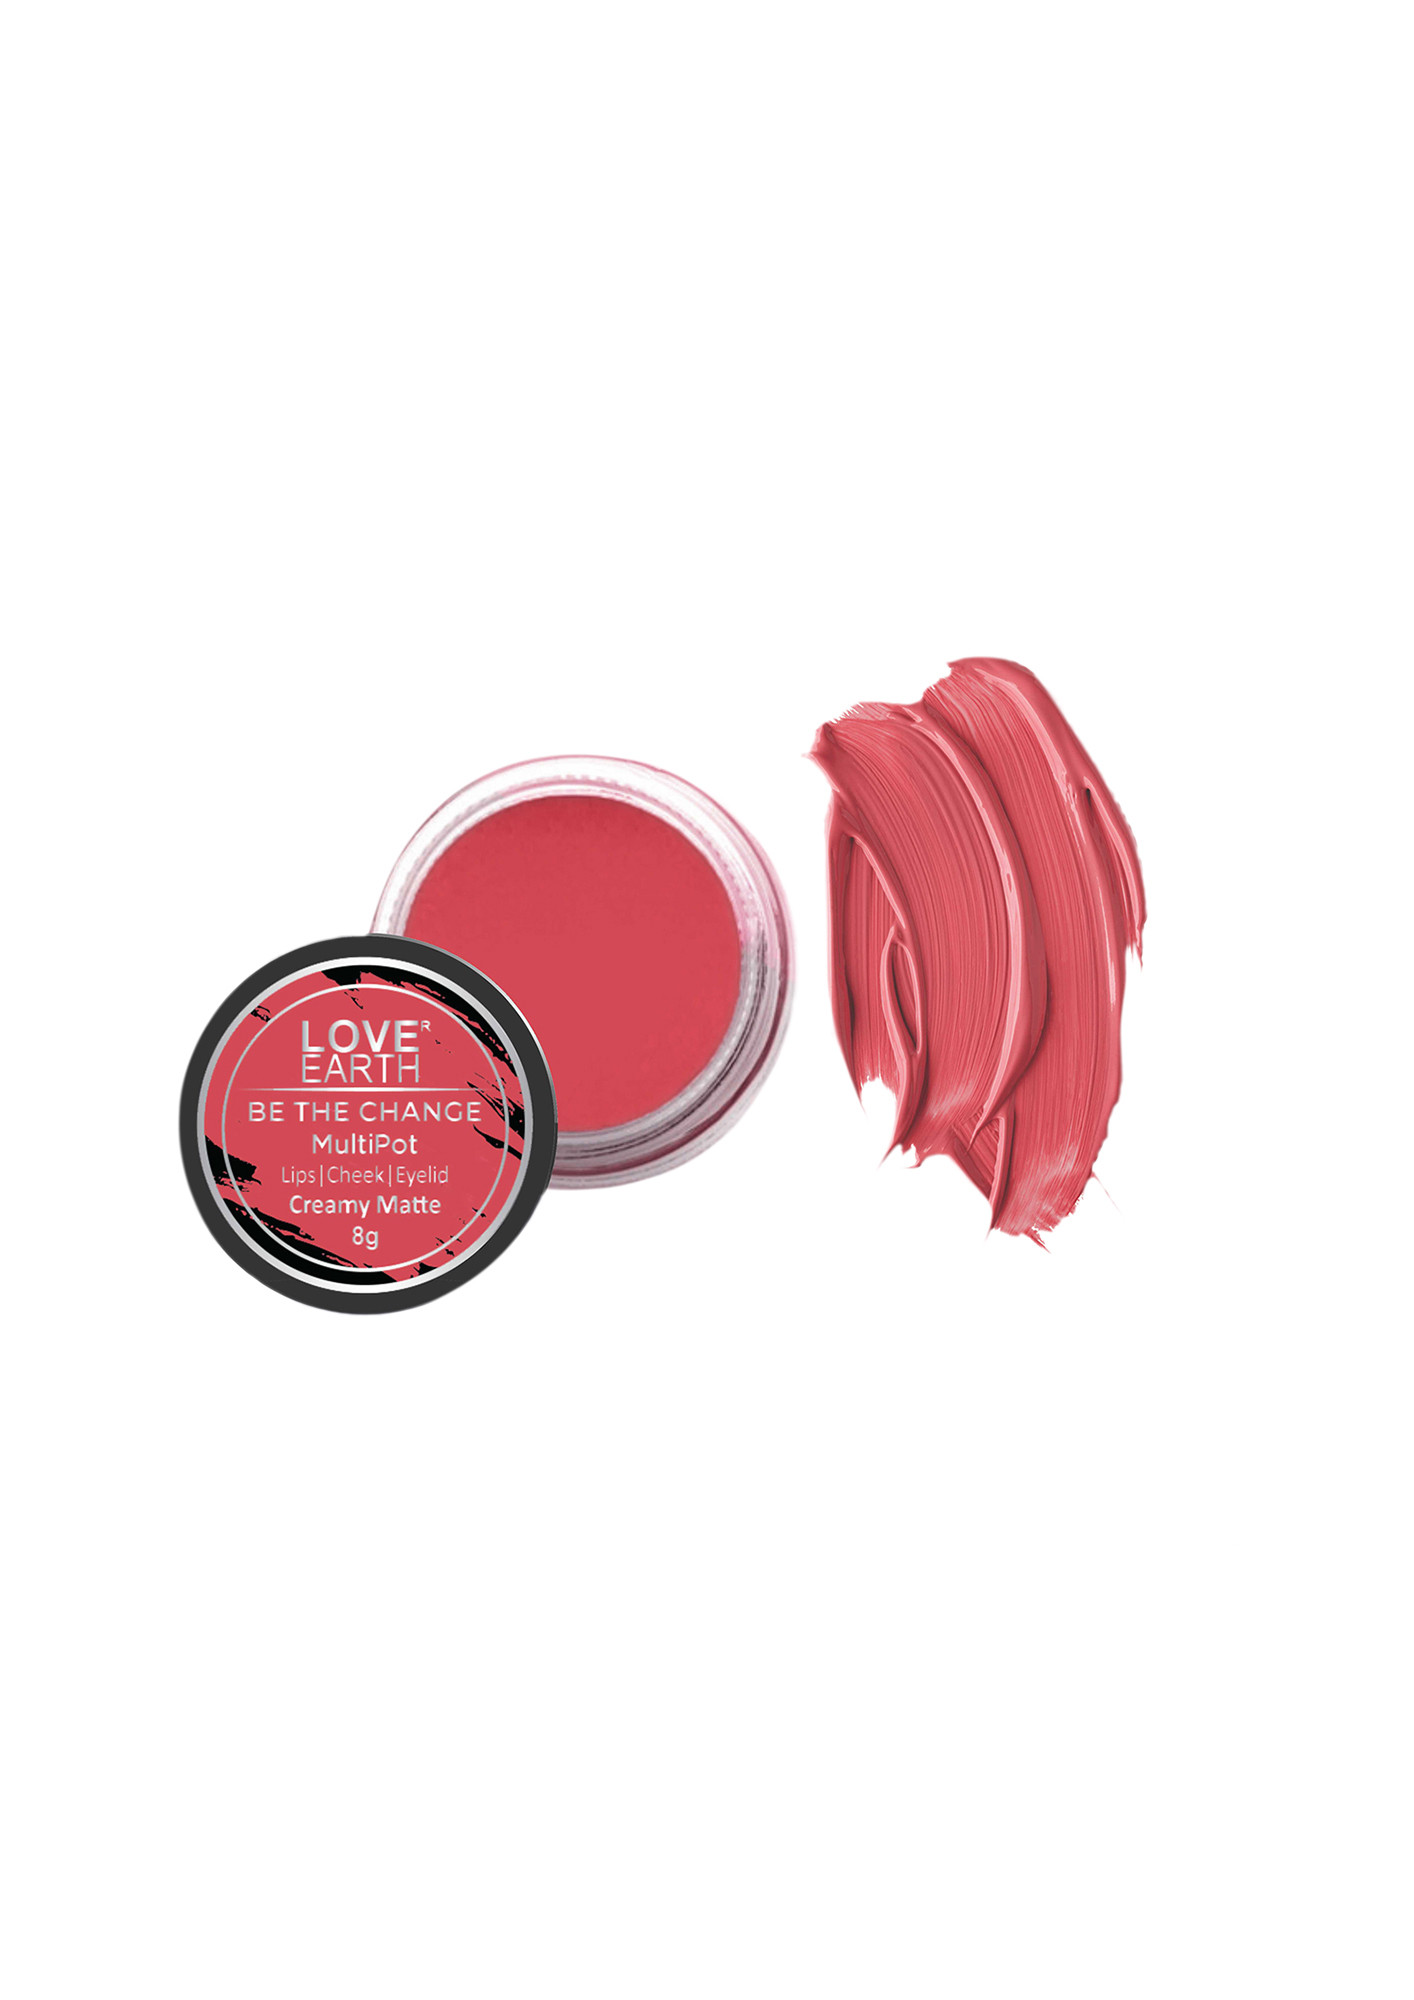 Love Earth Lip Tint & Cheek Tint Multipot-Be The Change With Richness Of Jojoba Oil And Vitamin E For Lips, Eyelids & Cheeks